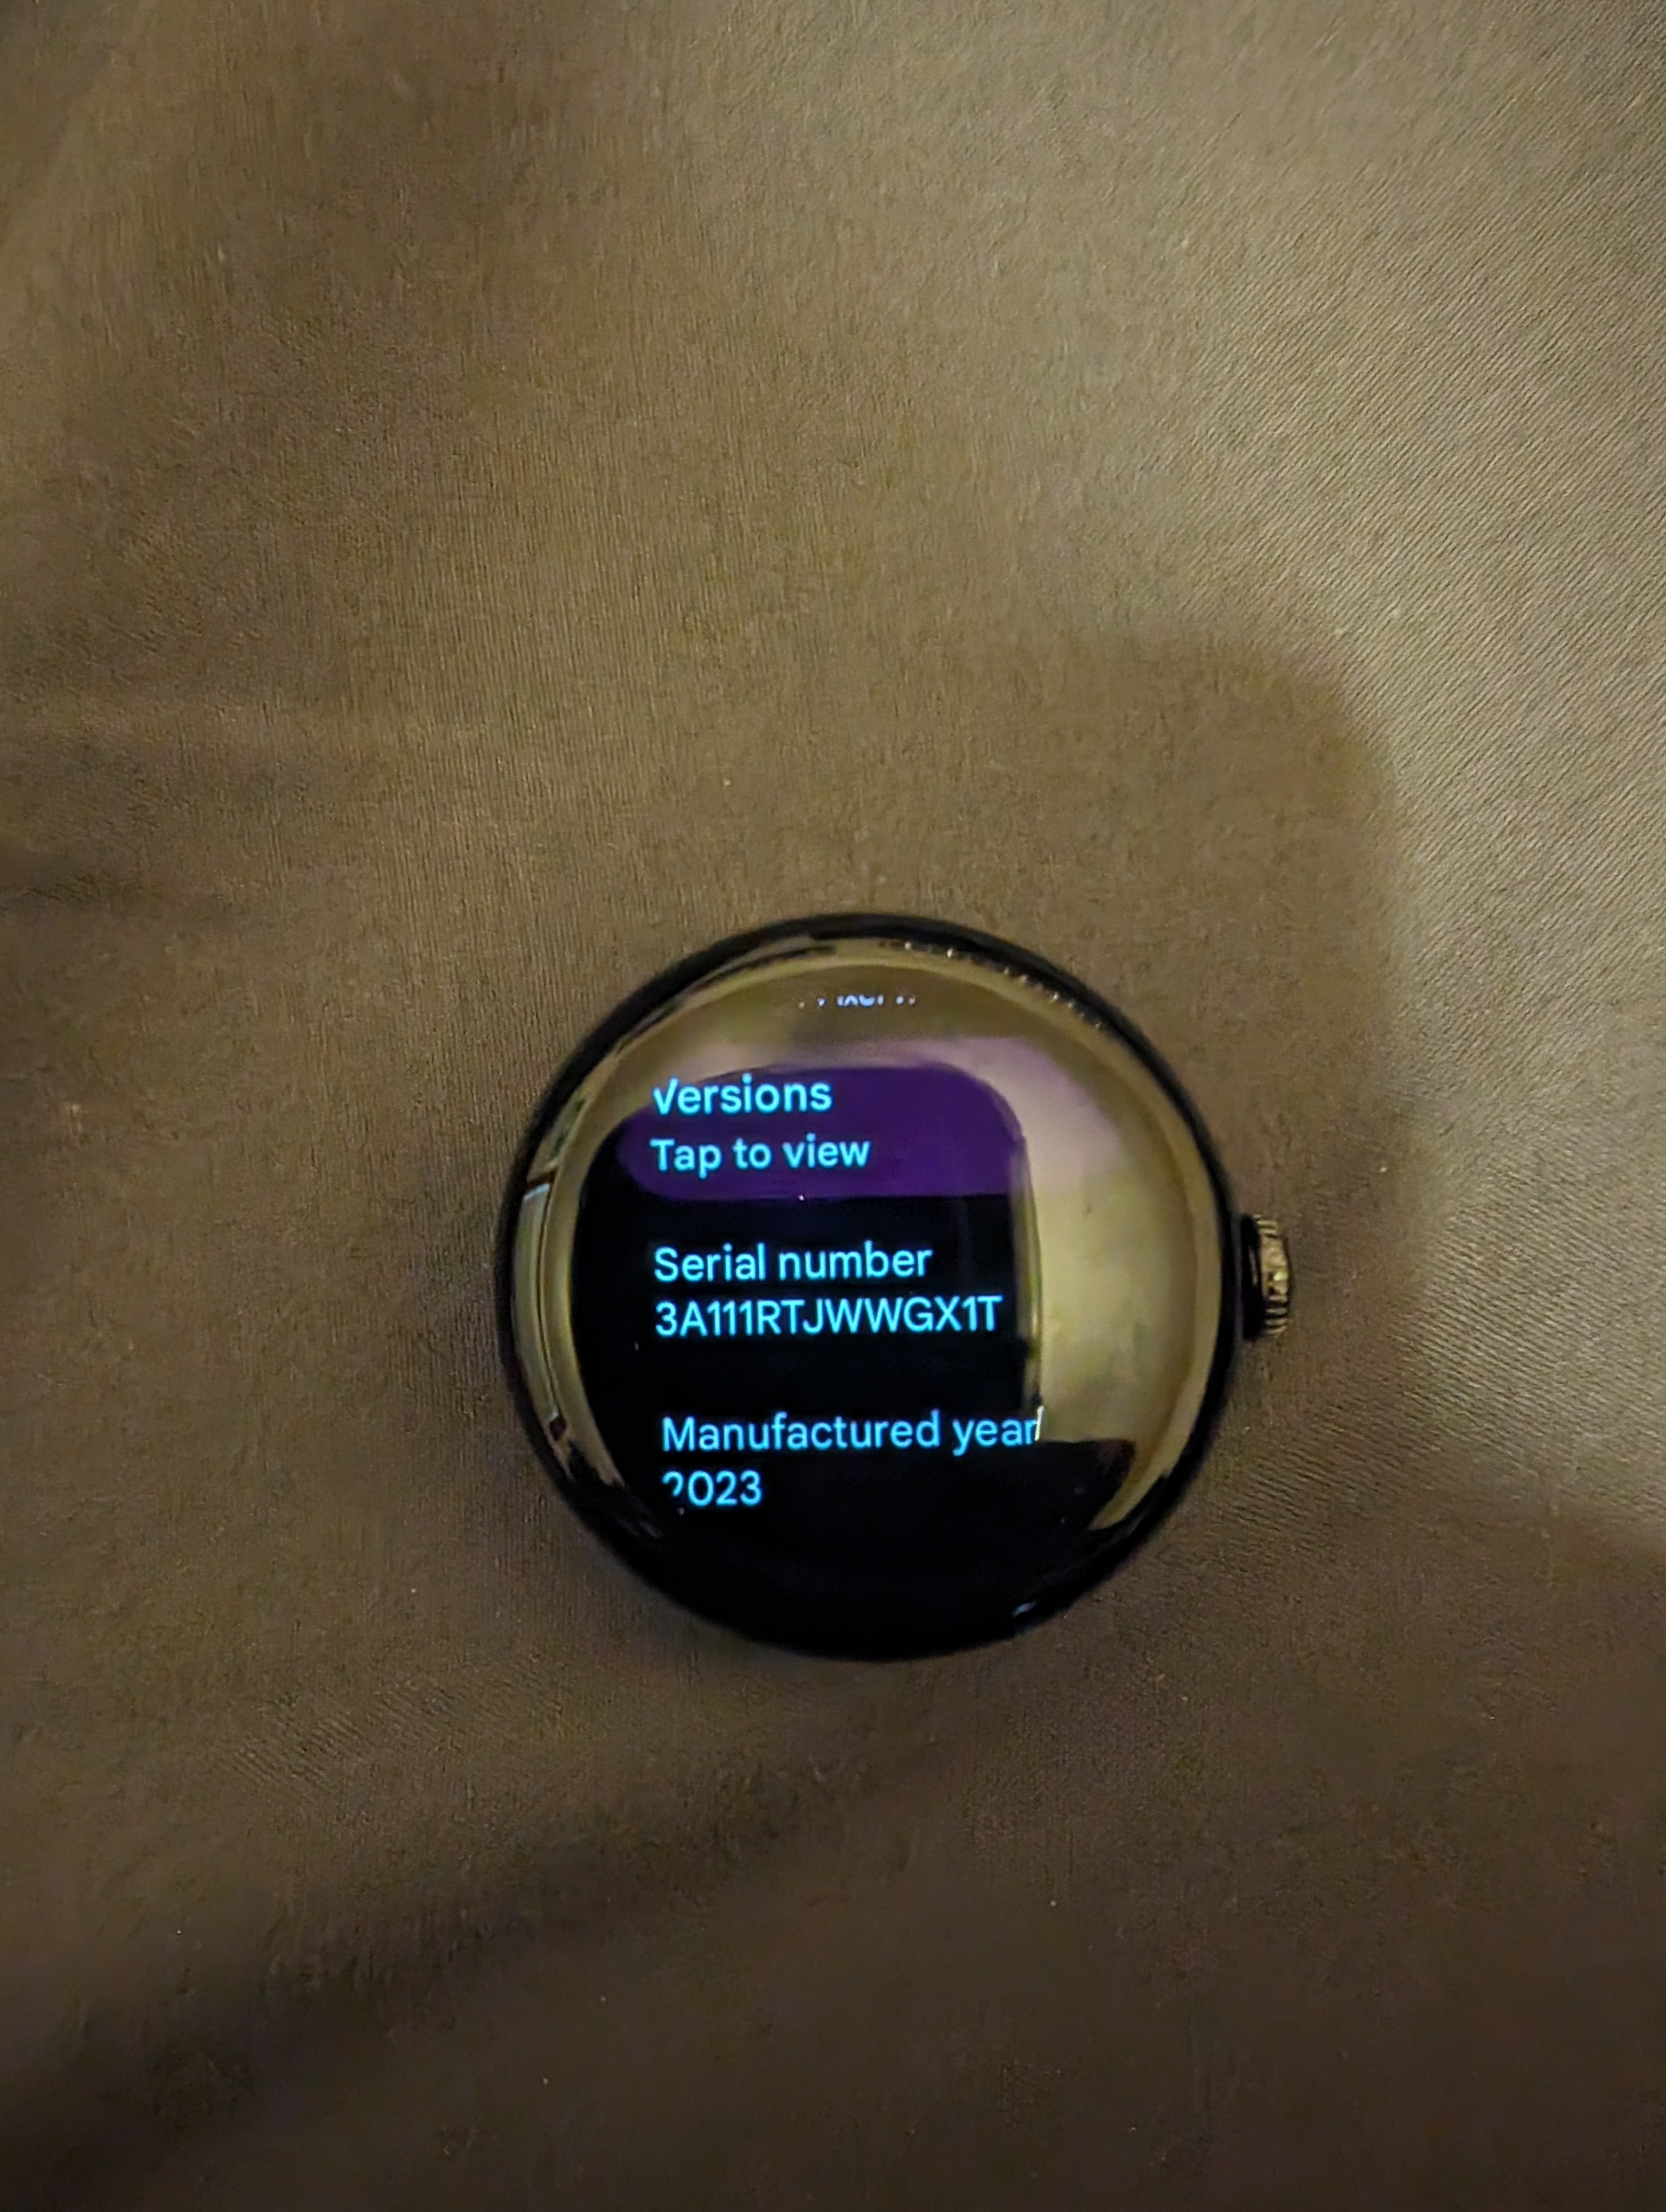 Google sold me a watch without an imei number - Google Pixel Watch Community